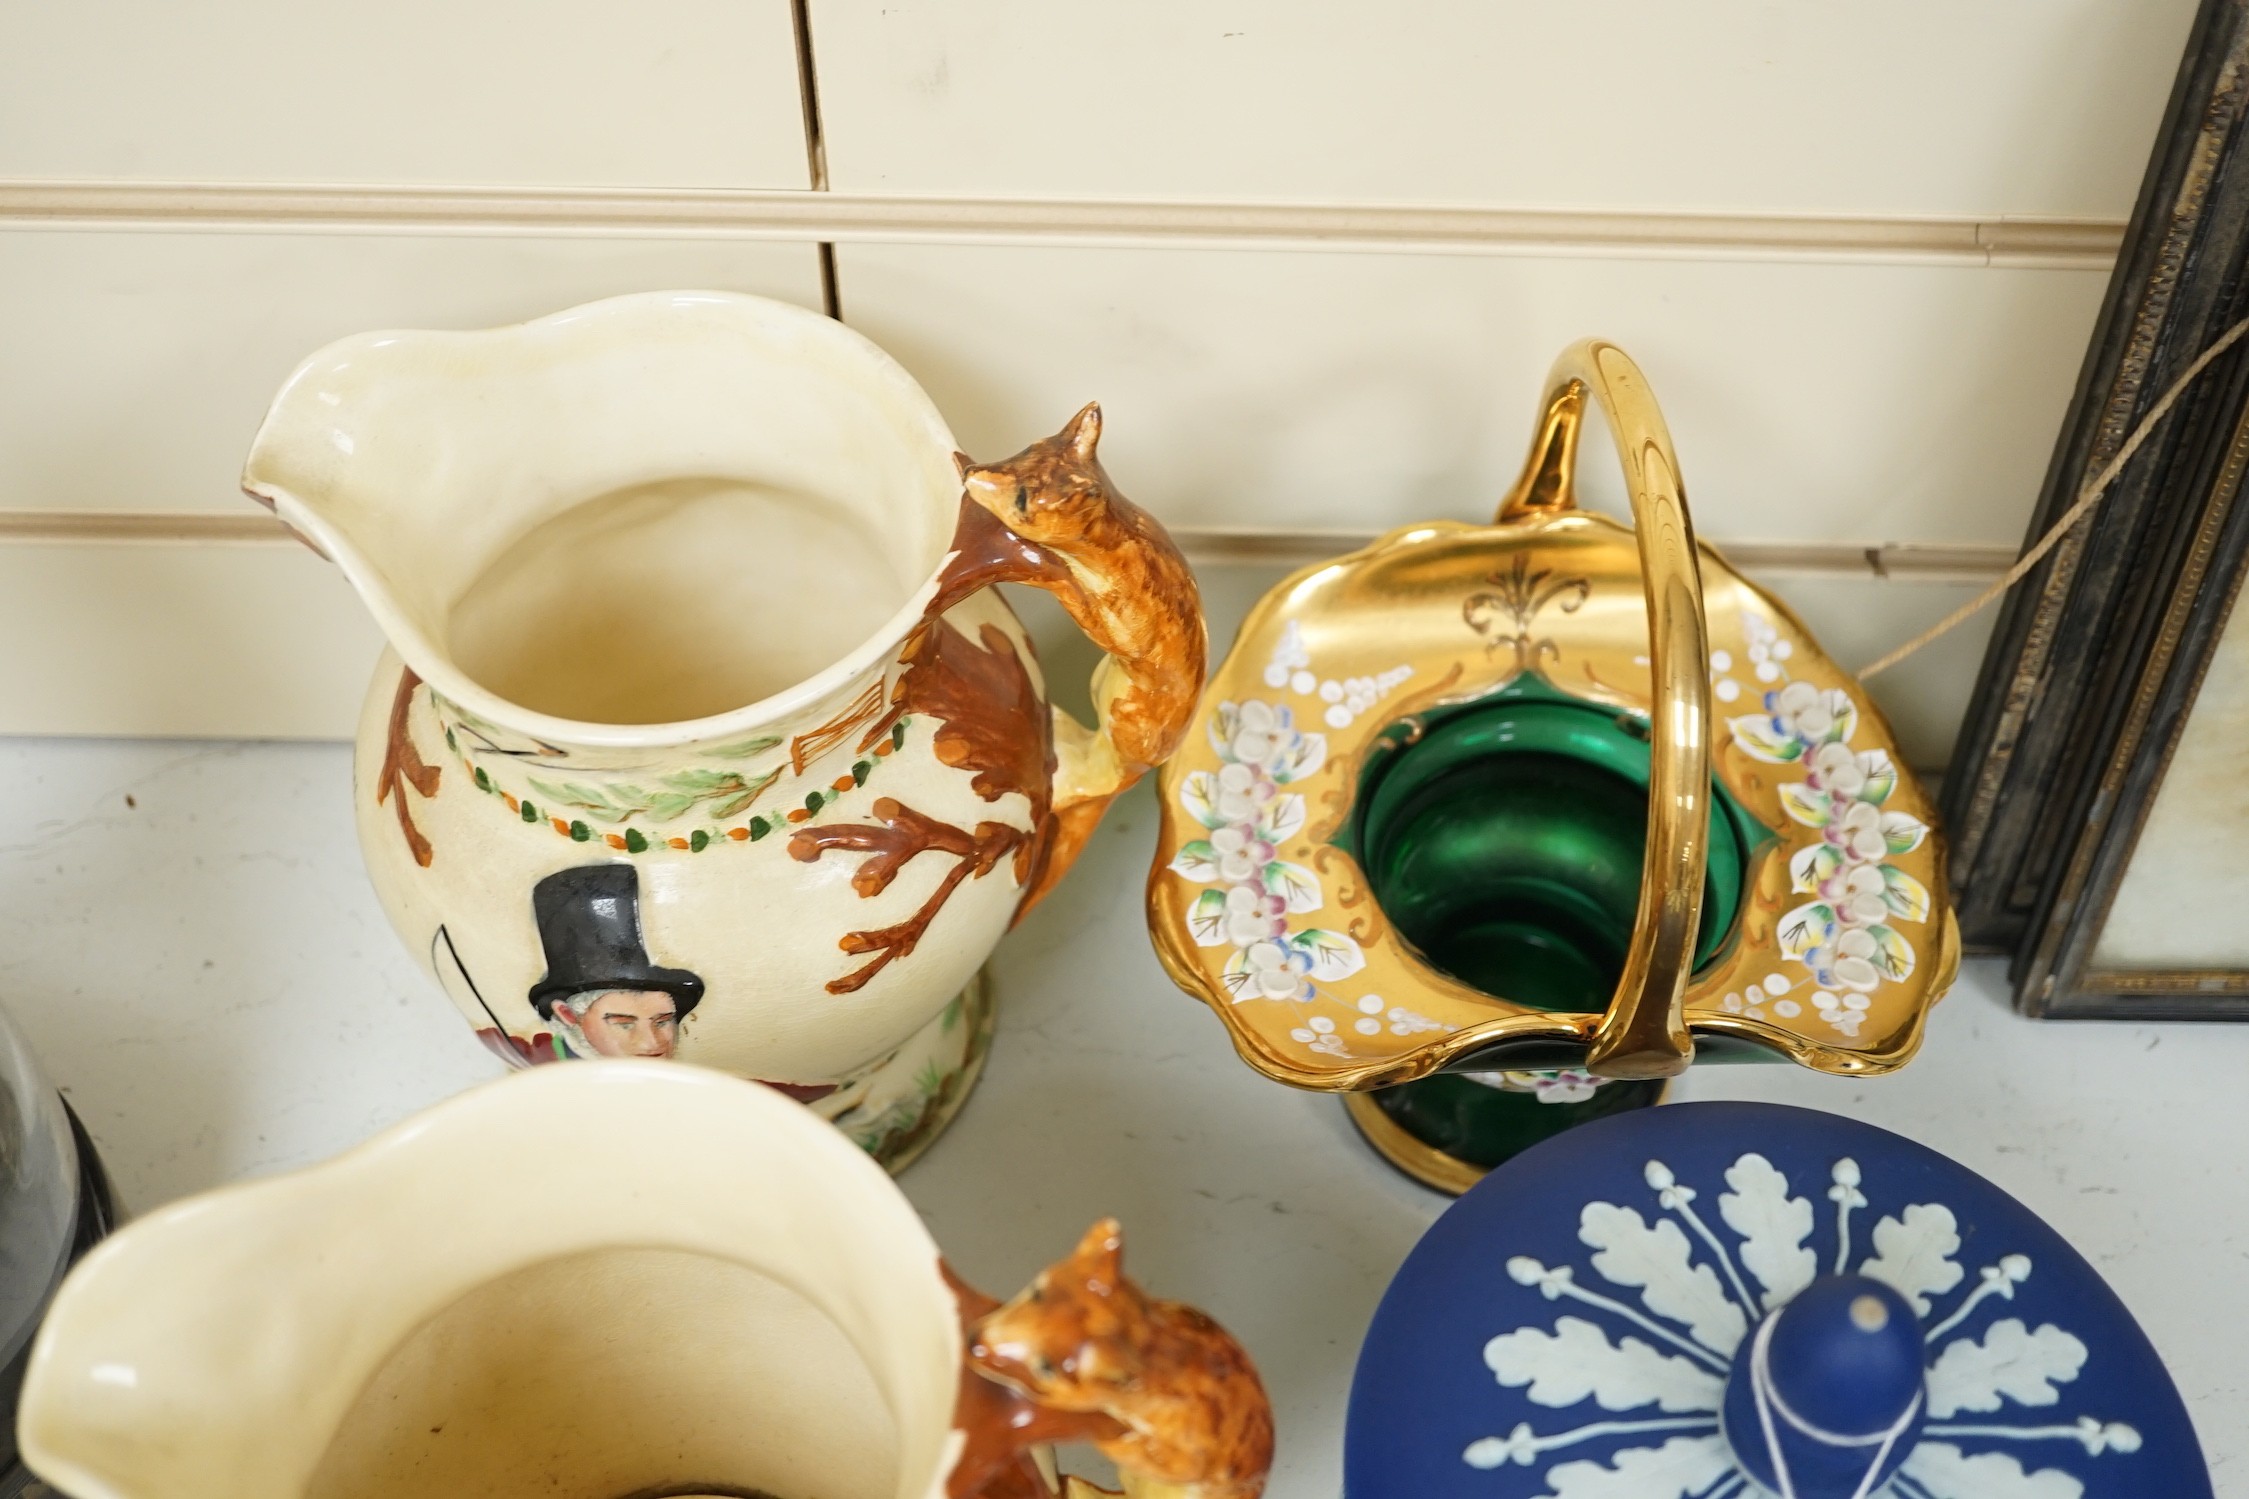 A pair of John Peel musical character jugs, a Wedgwood Jasper Ware biscuit box, enamel green glass basket and a pair of basket figural ceramic plates.